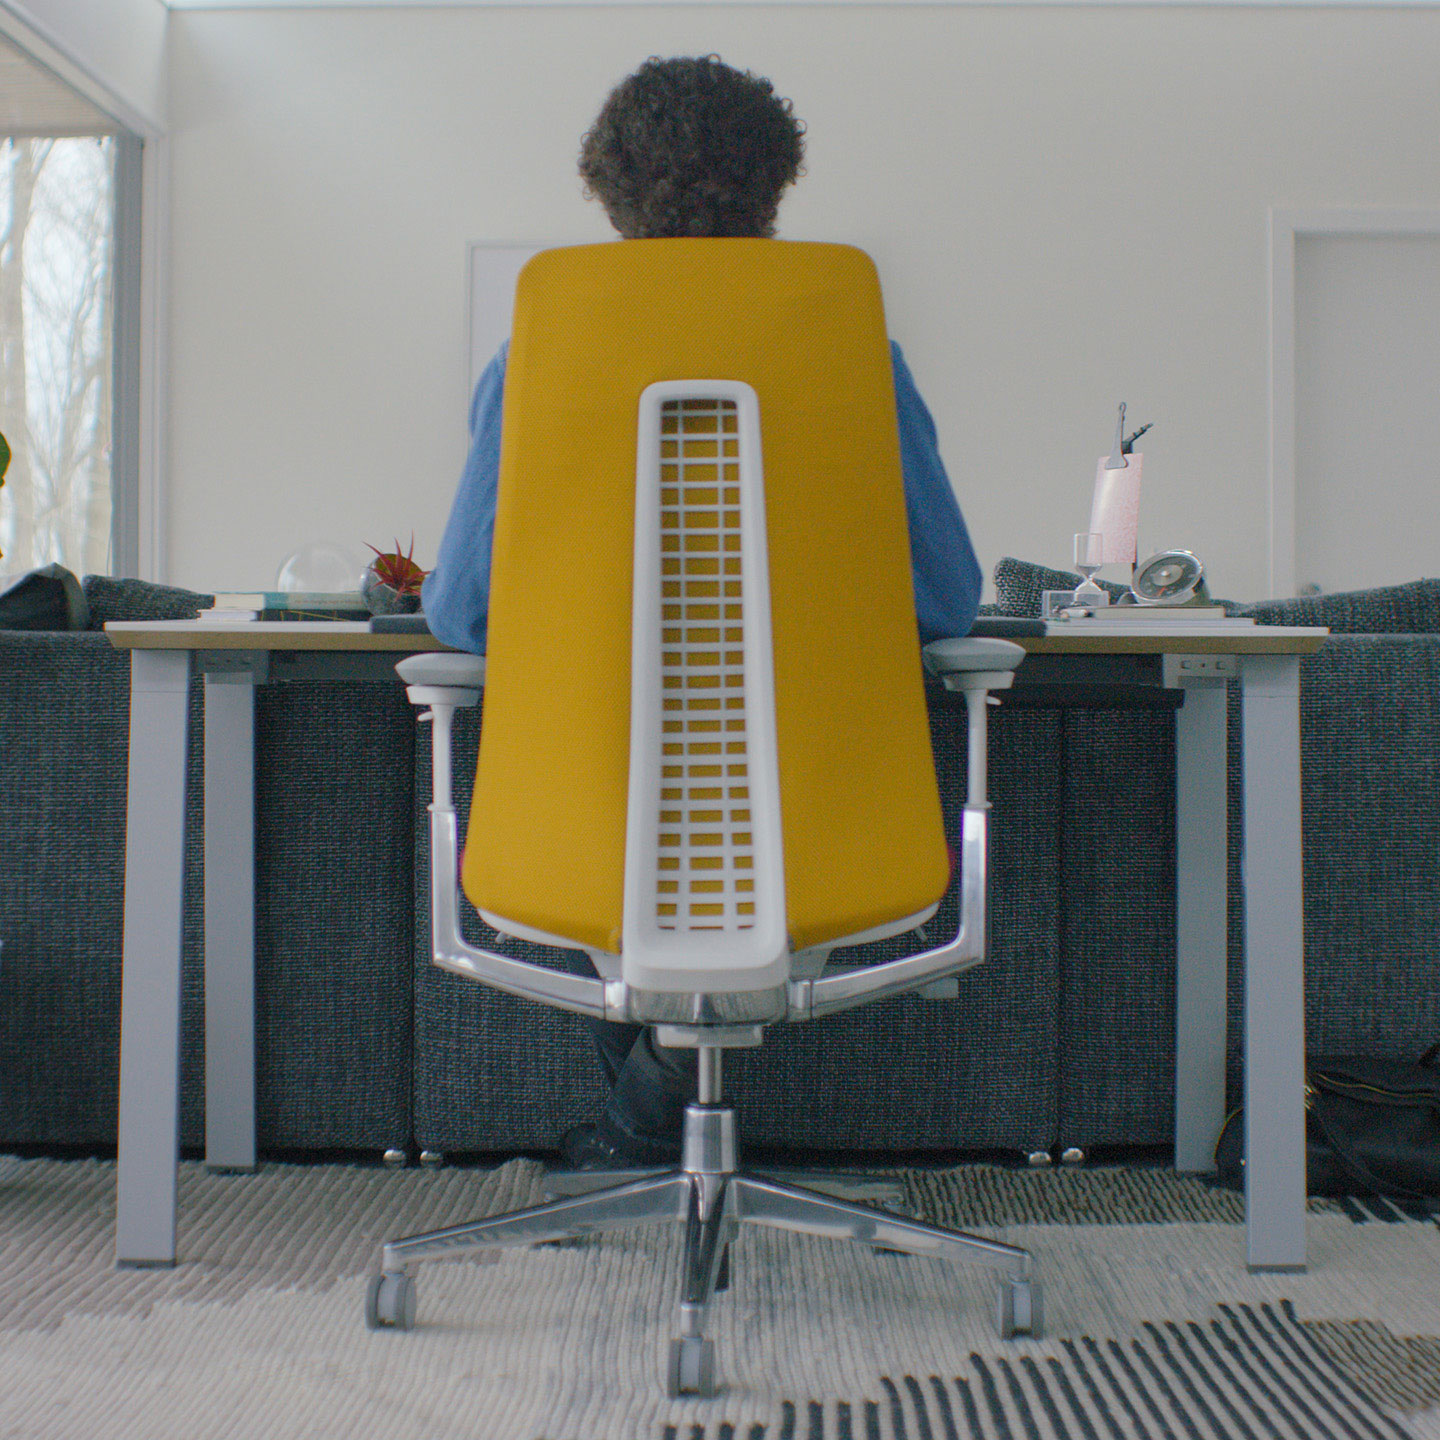 Haworth Fern desk chair in yellow upholstery placed at a individual desk in a room